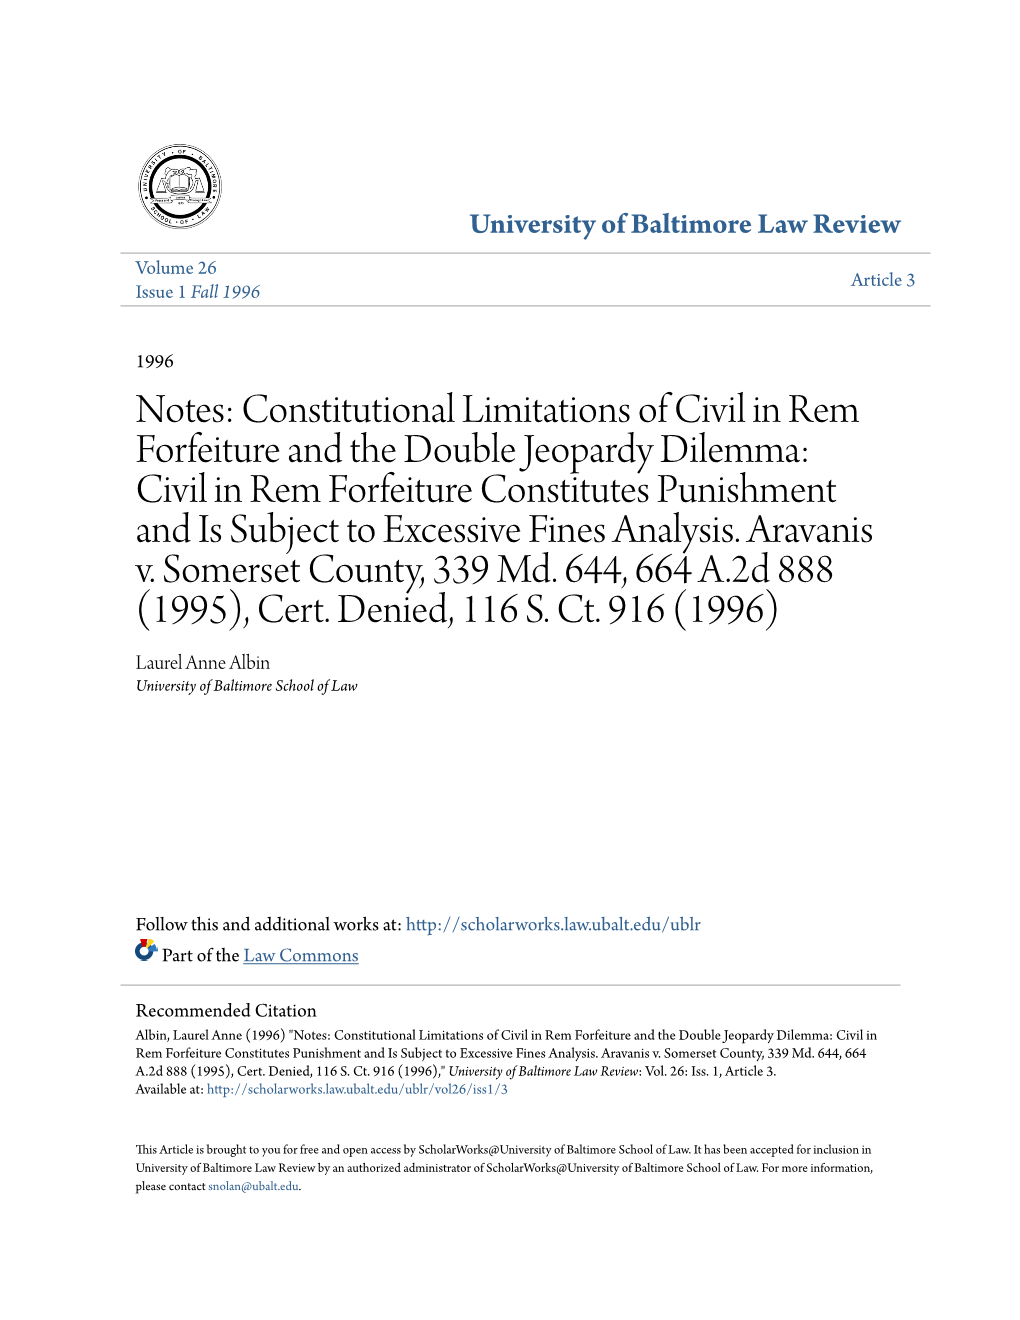 Constitutional Limitations of Civil in Rem Forfeiture and the Double